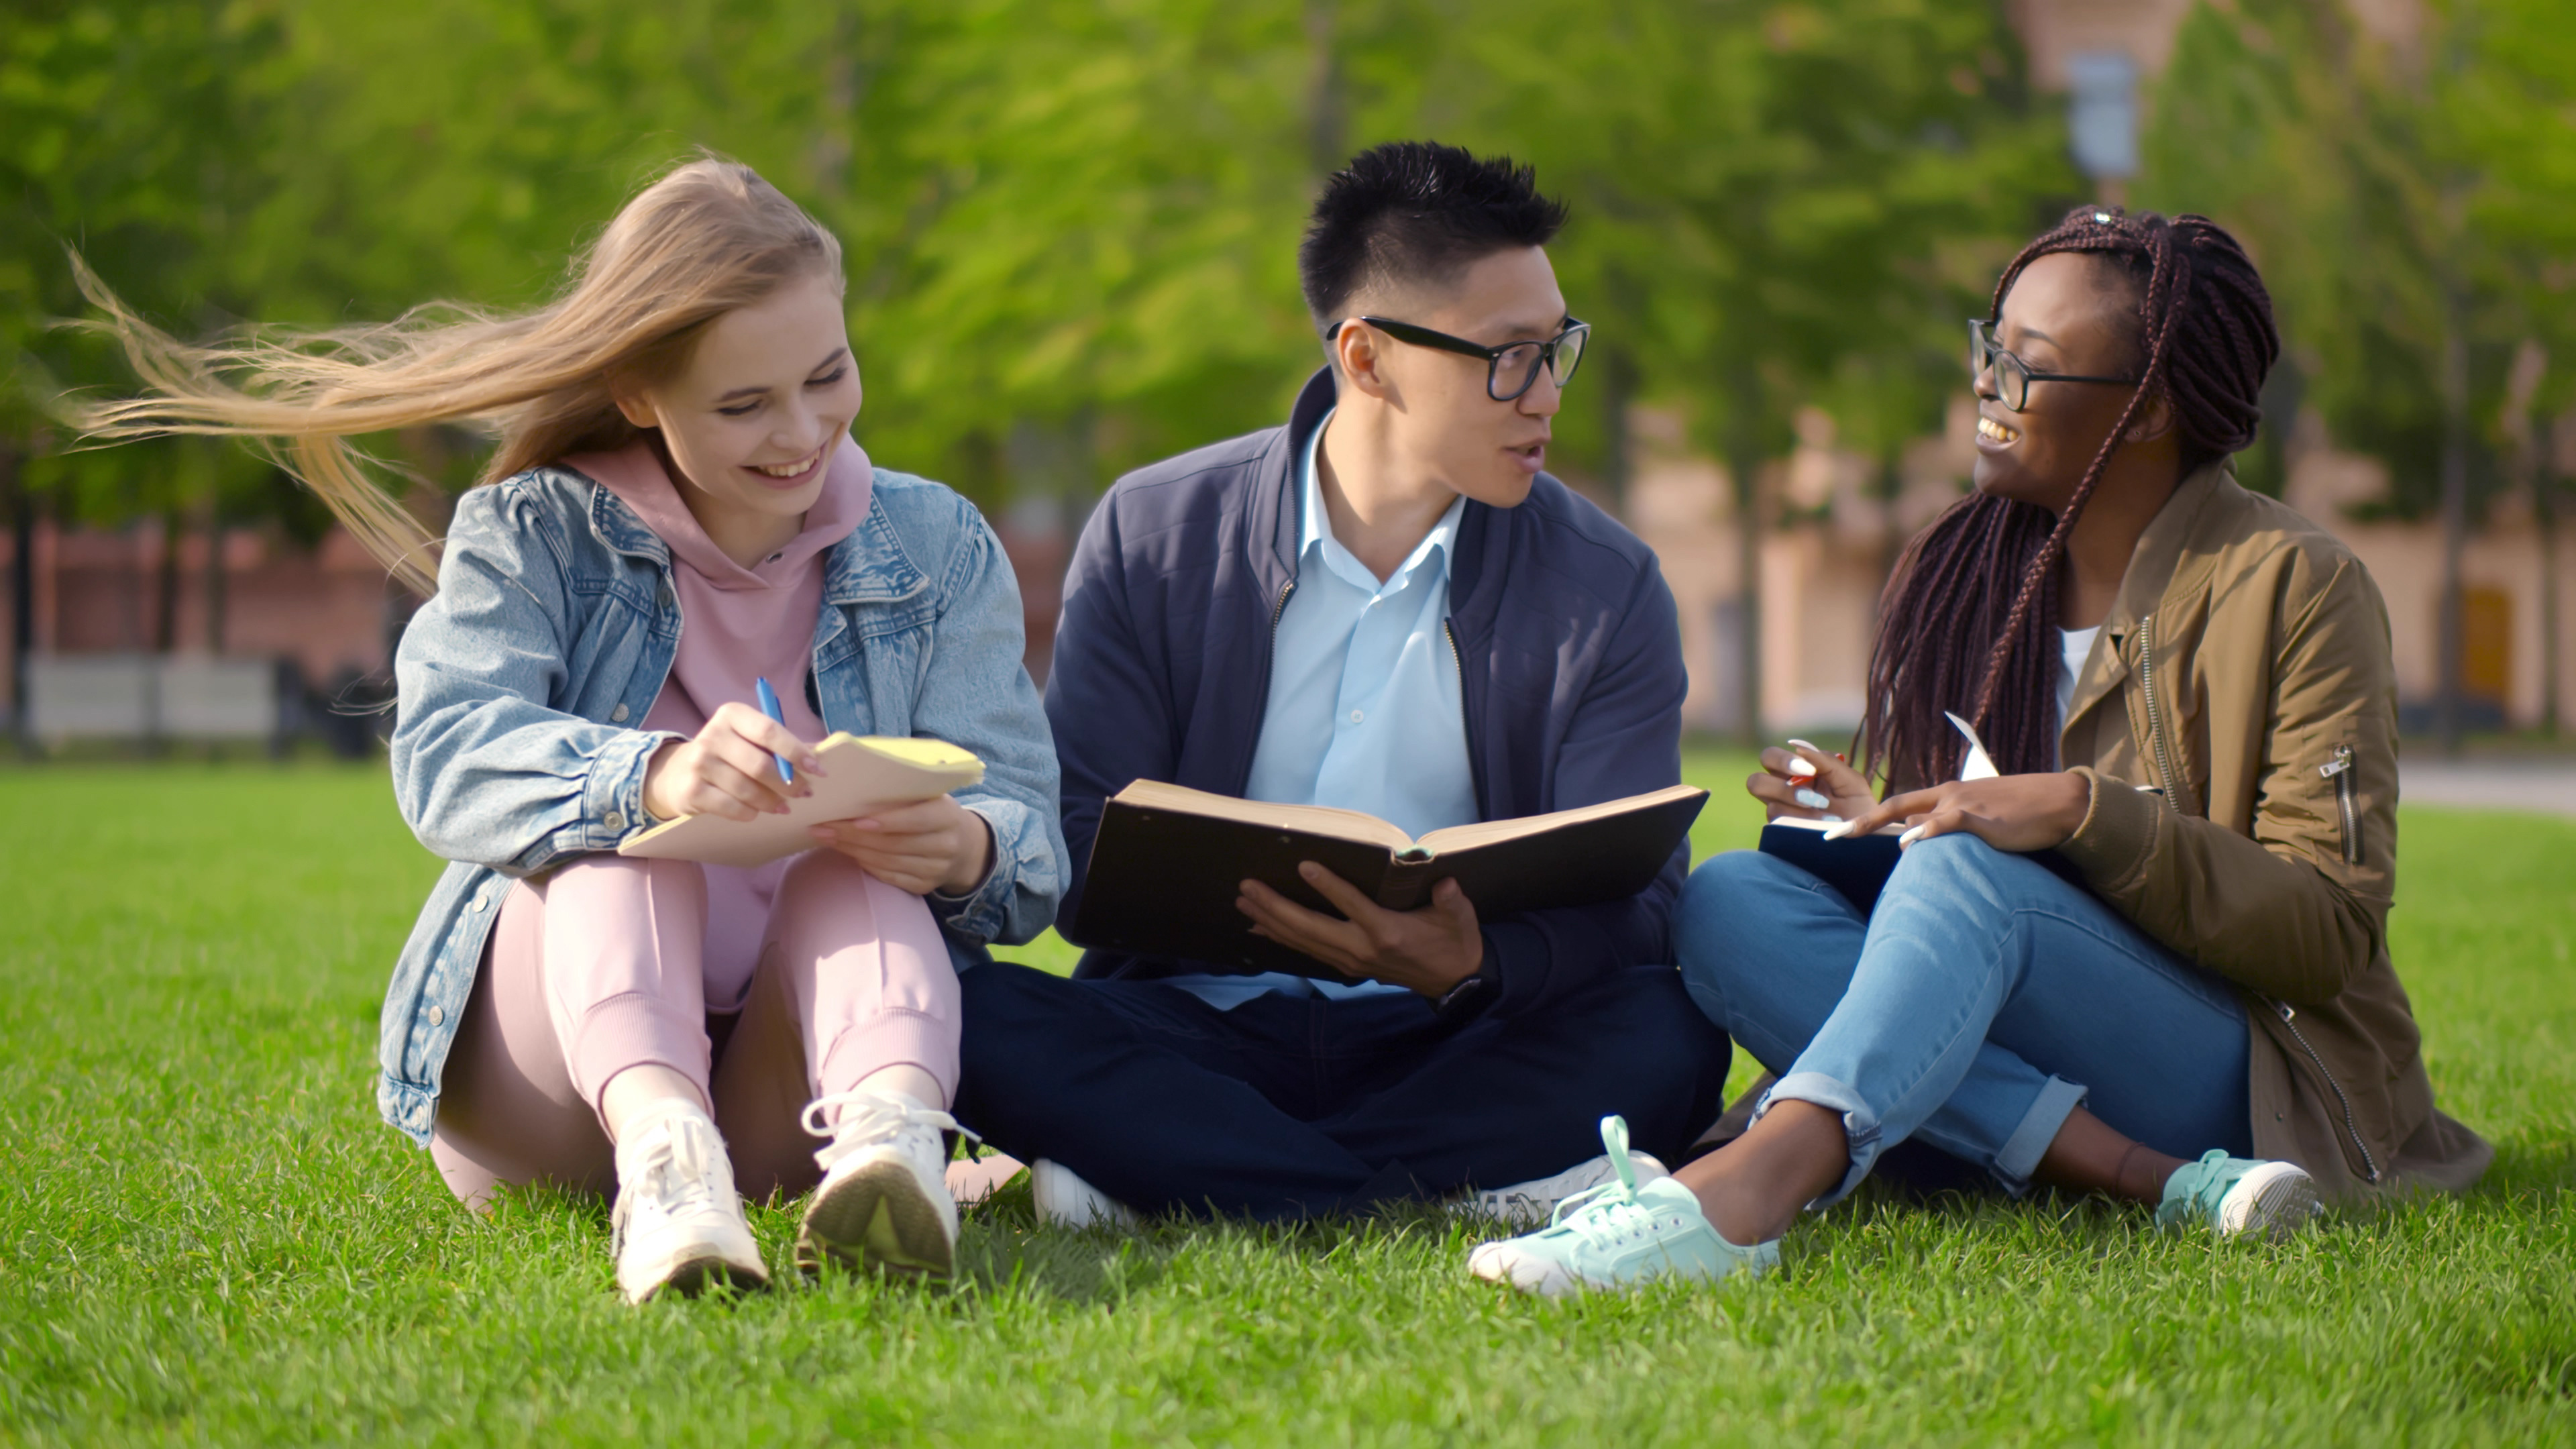 3 students sitting on the grass outside